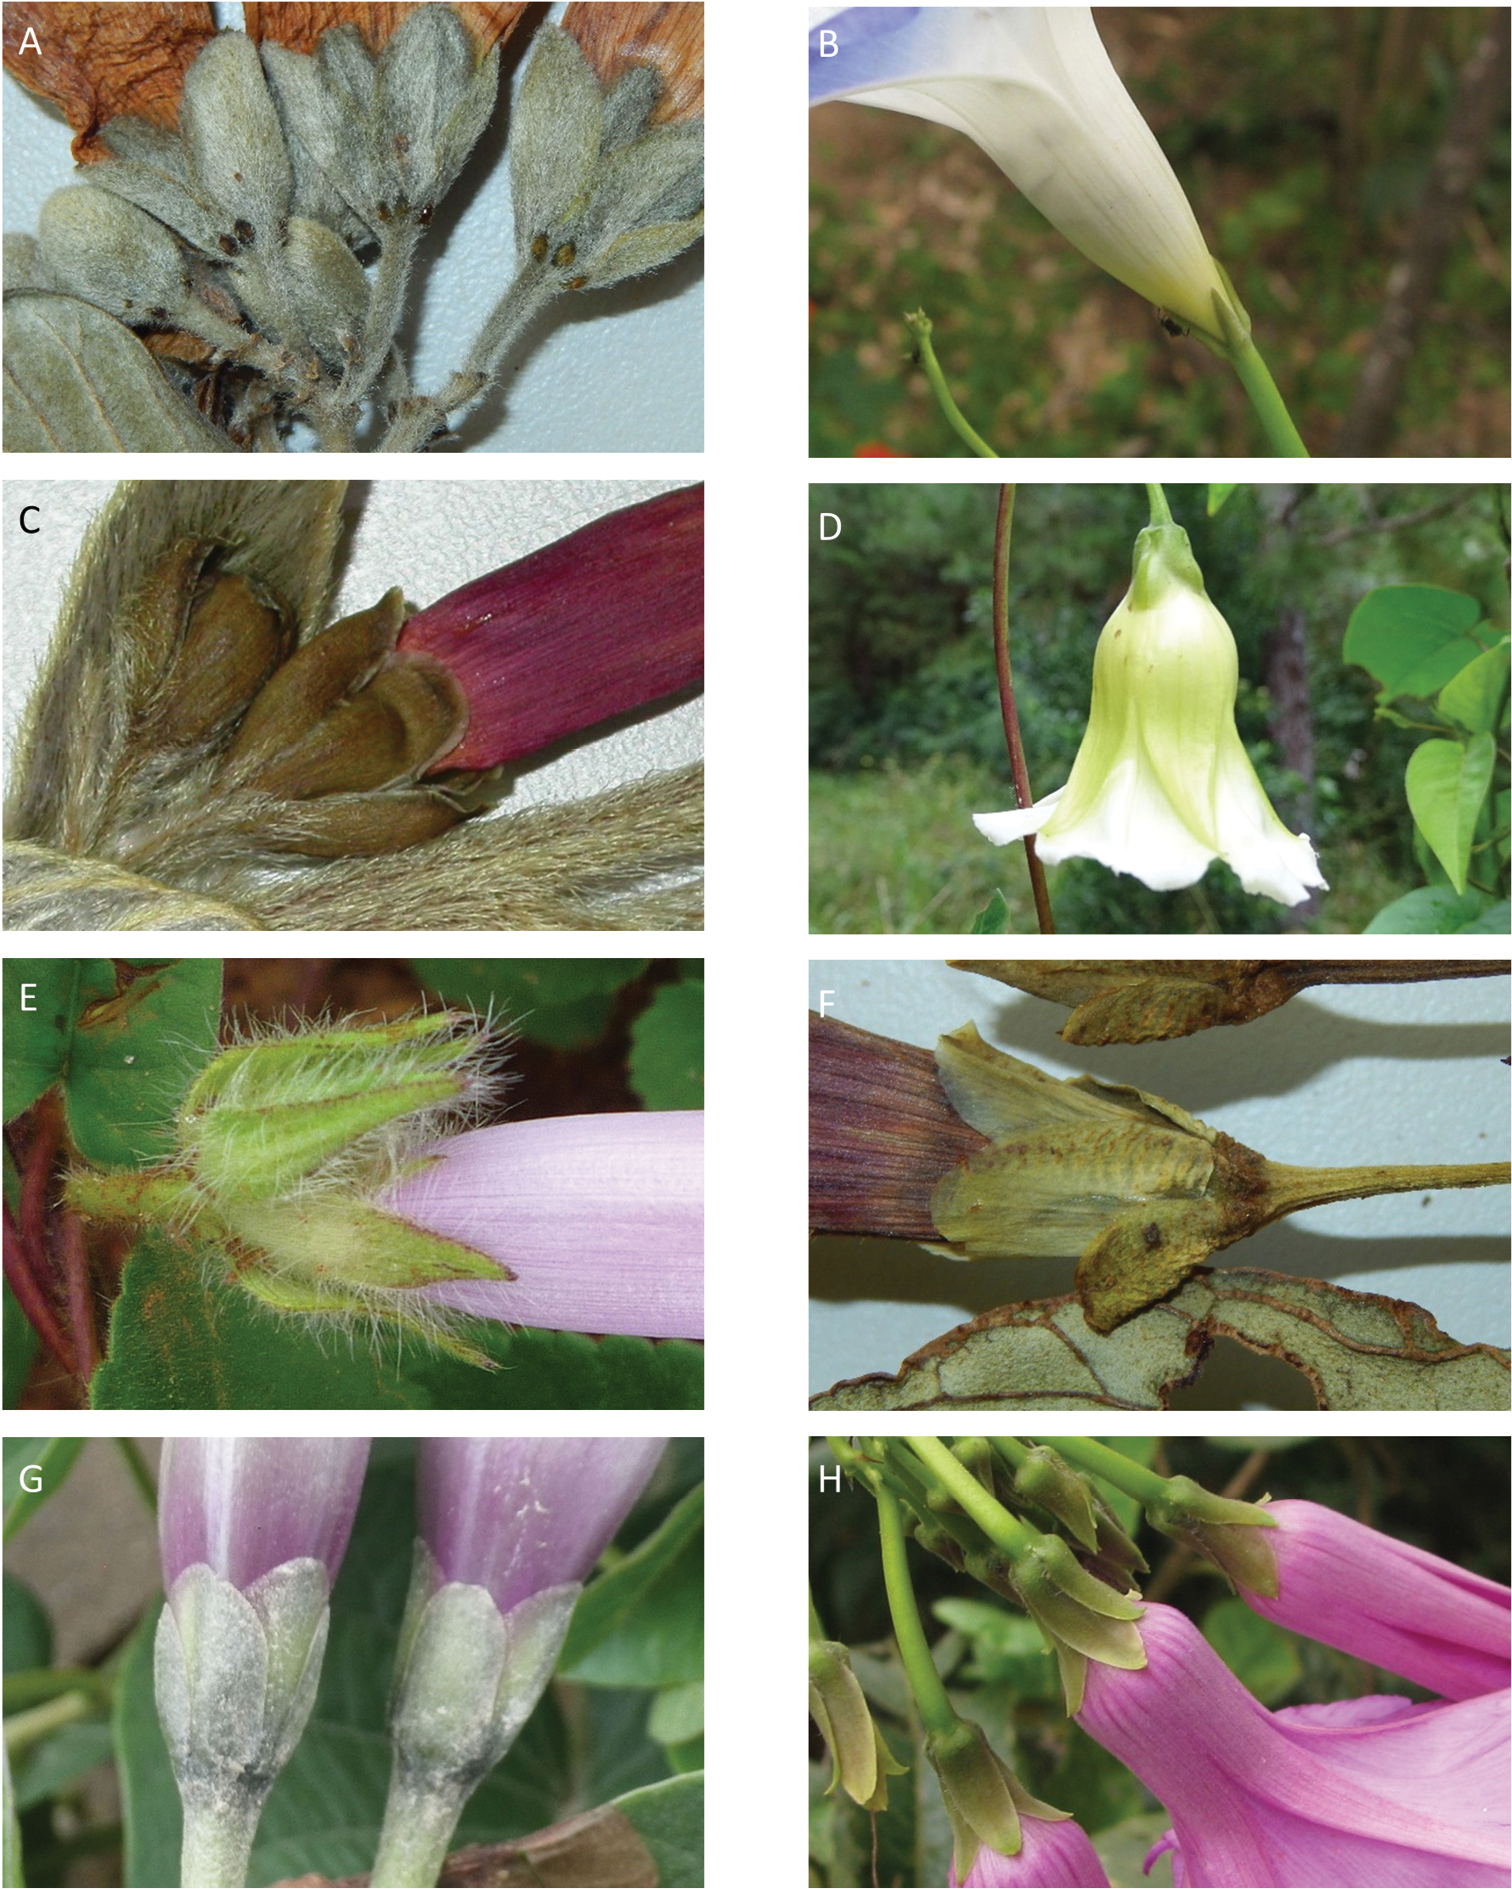 A foundation monograph of Ipomoea (Convolvulaceae) in the New World